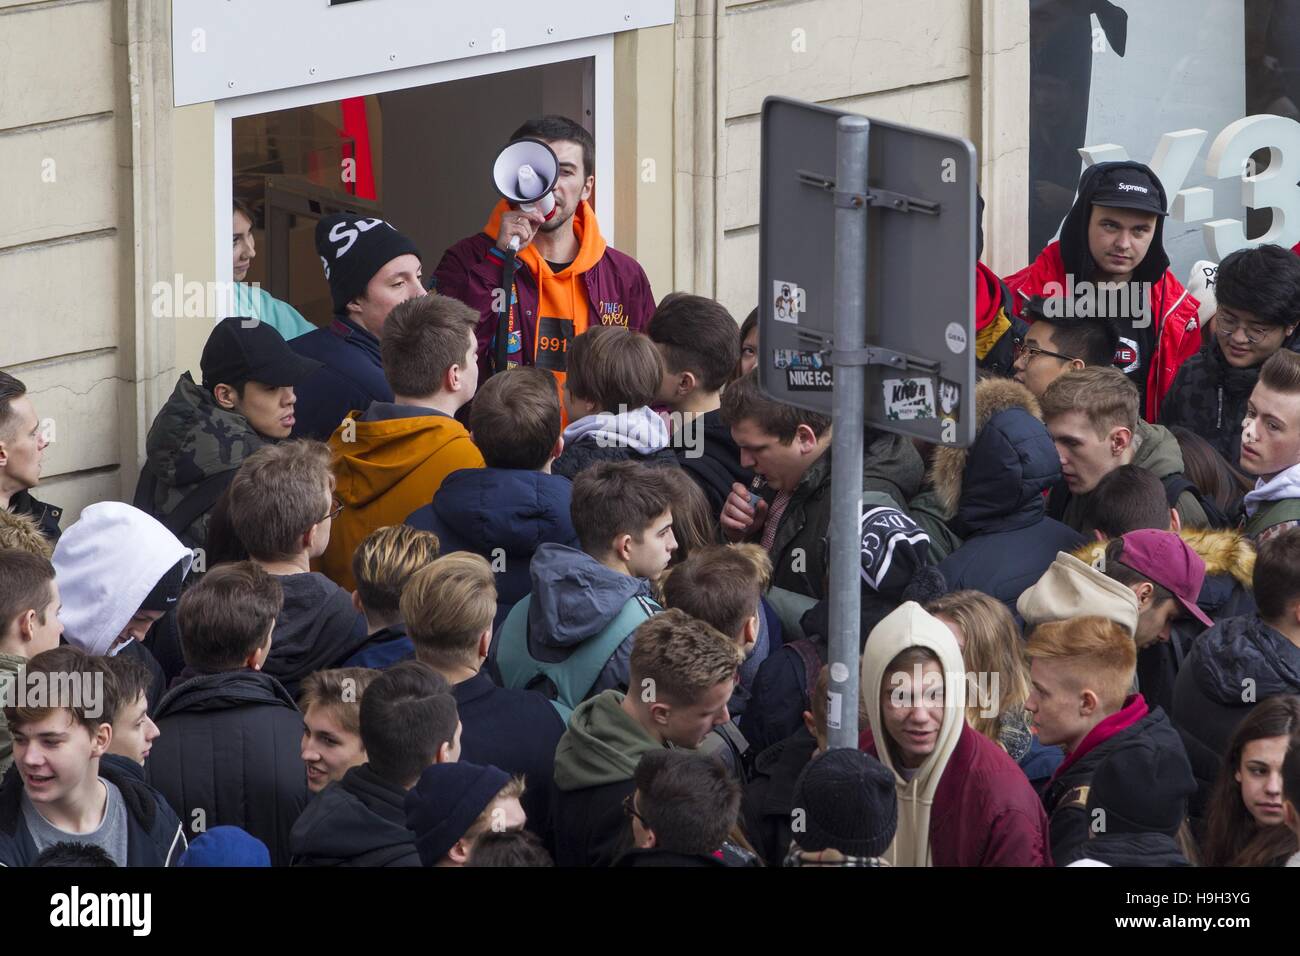 Warsaw, Poland. 23rd Nov, 2016. A huge crowd of people queue in front of  the CL20 foot store to buy new yeezy boost 350 by Kanye West on November  23, 2016 in